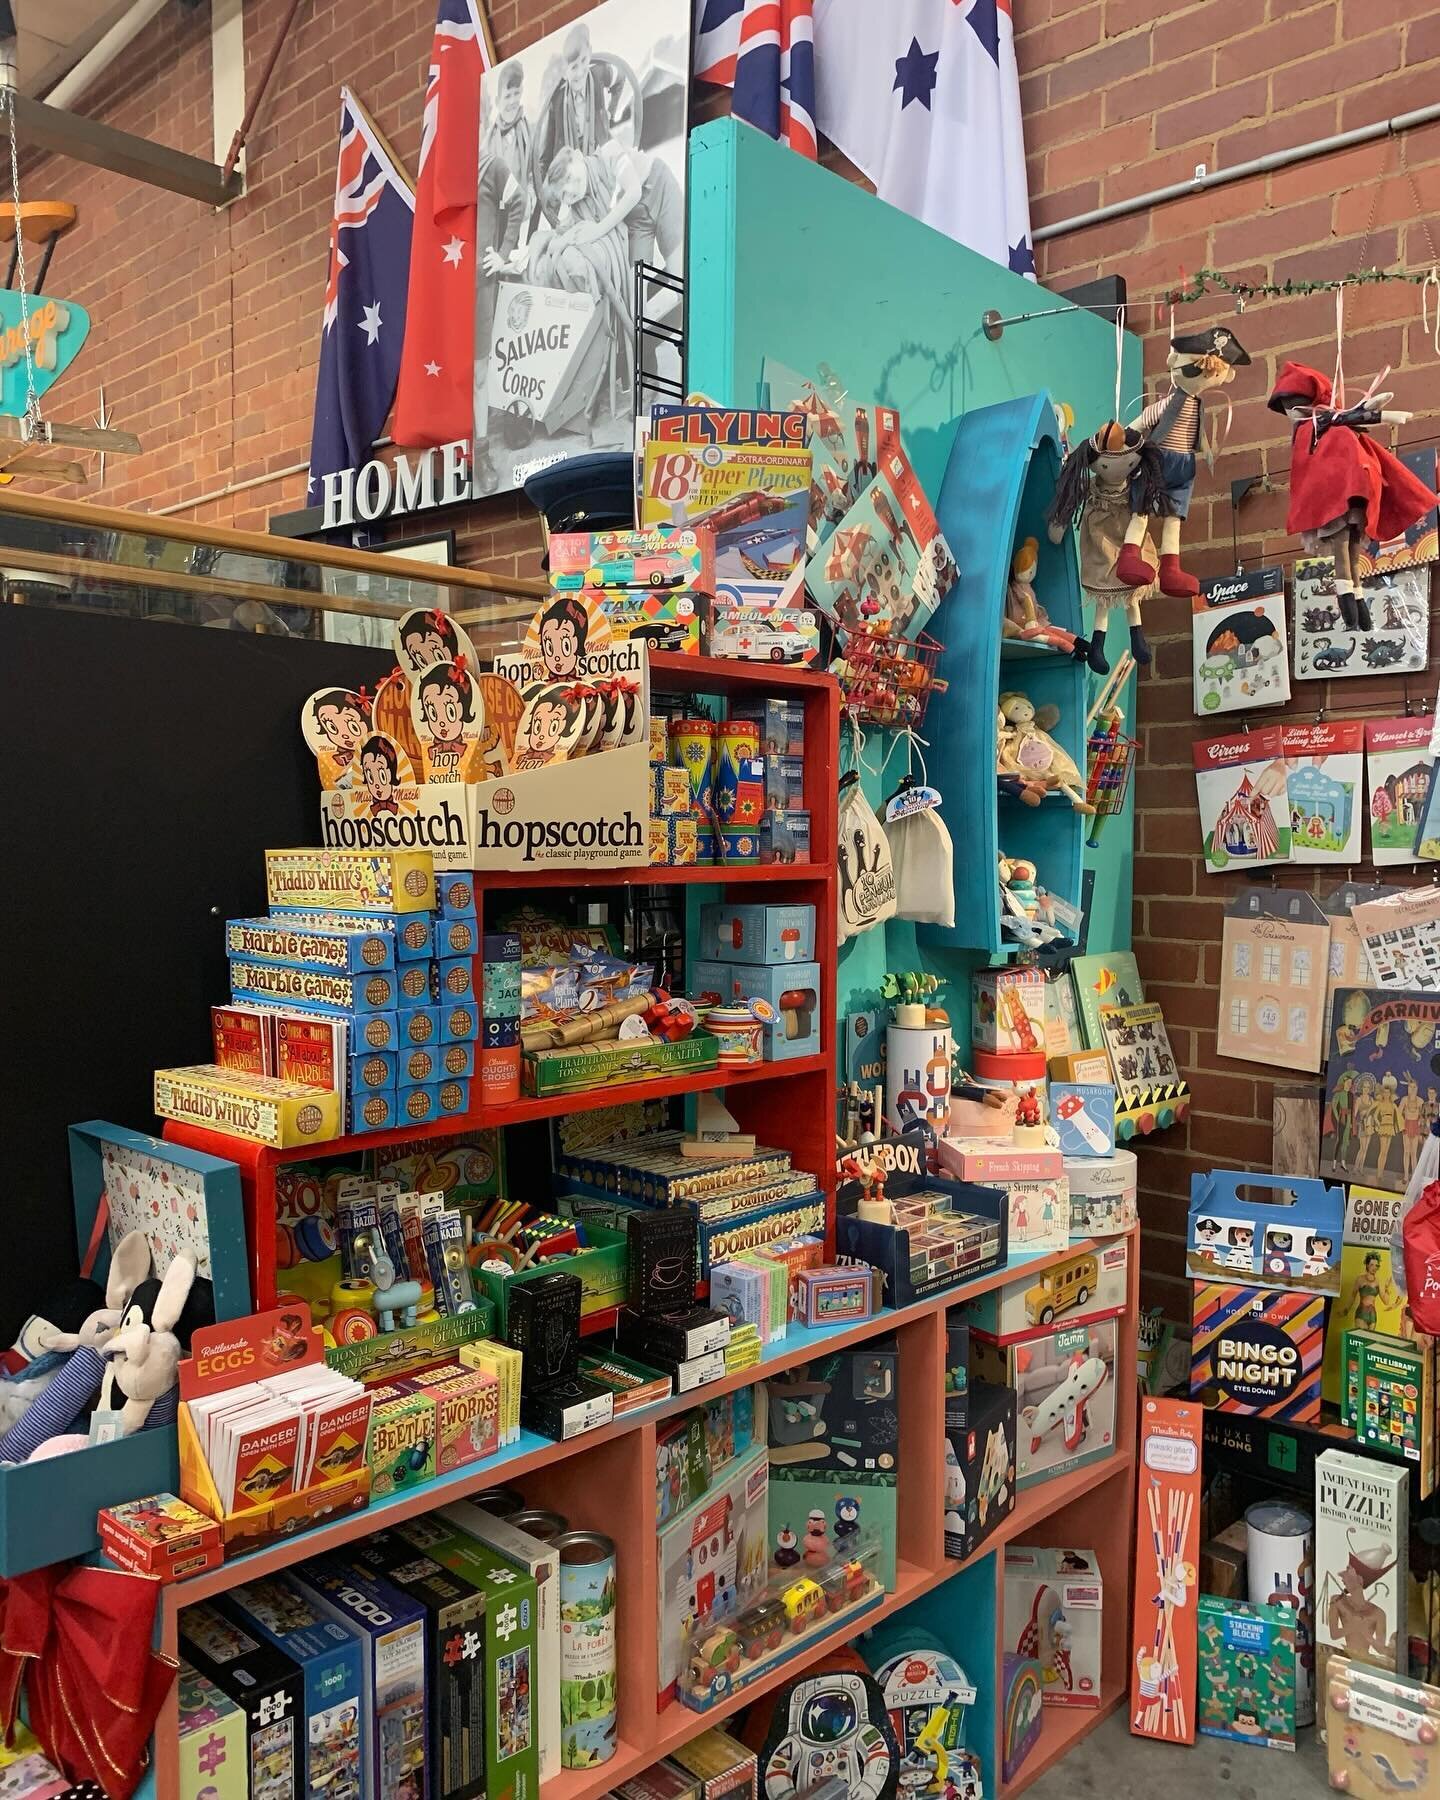 Stocking Fillers galore! We challenge you to not smile when you see all the delights we have available and just waiting to fill those socks! 

Online and in-store within Dirty Janes Canberra in Fyshwick 7 days a week 10am - 5pm, and until 6.30pm for 